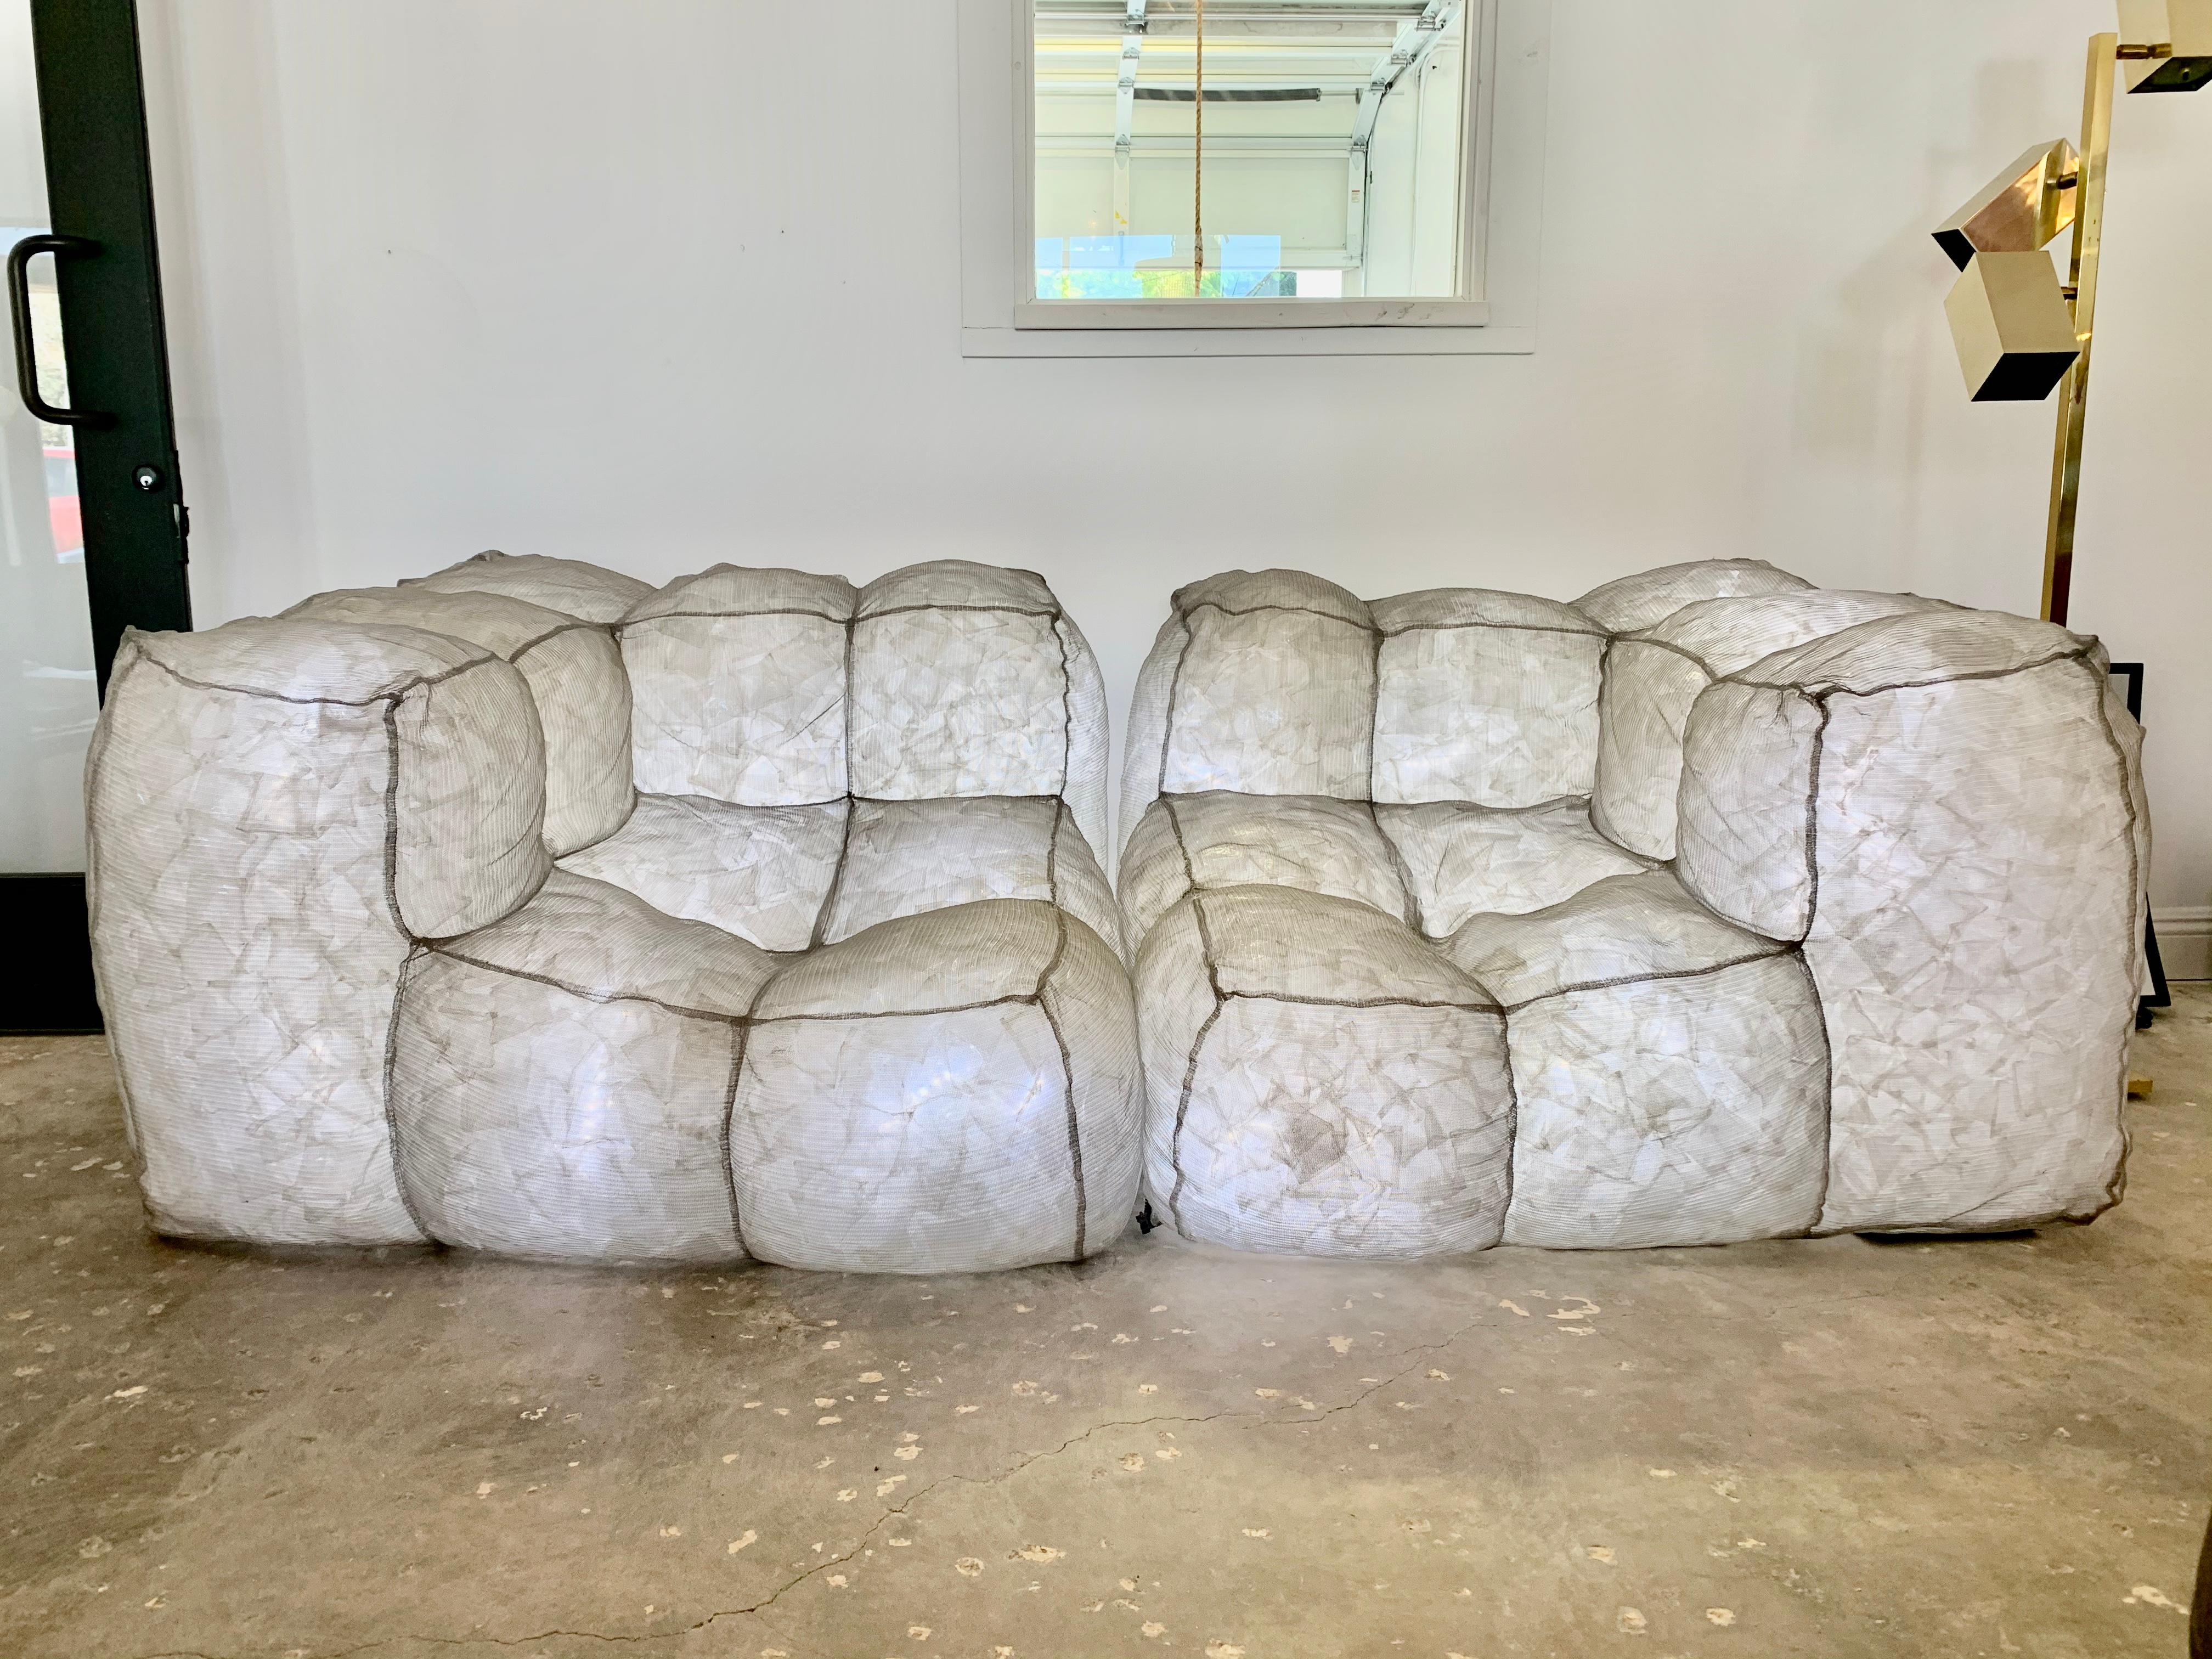 Stunning stainless steel mesh sofa by Mario Bellini with built in LED lights. Made for Meritalia in 2007. Original labels, hand-marked/numbered. Sofa comes with an illuminated pillow as well. Mesh sofa is filled with thousands of air packets.